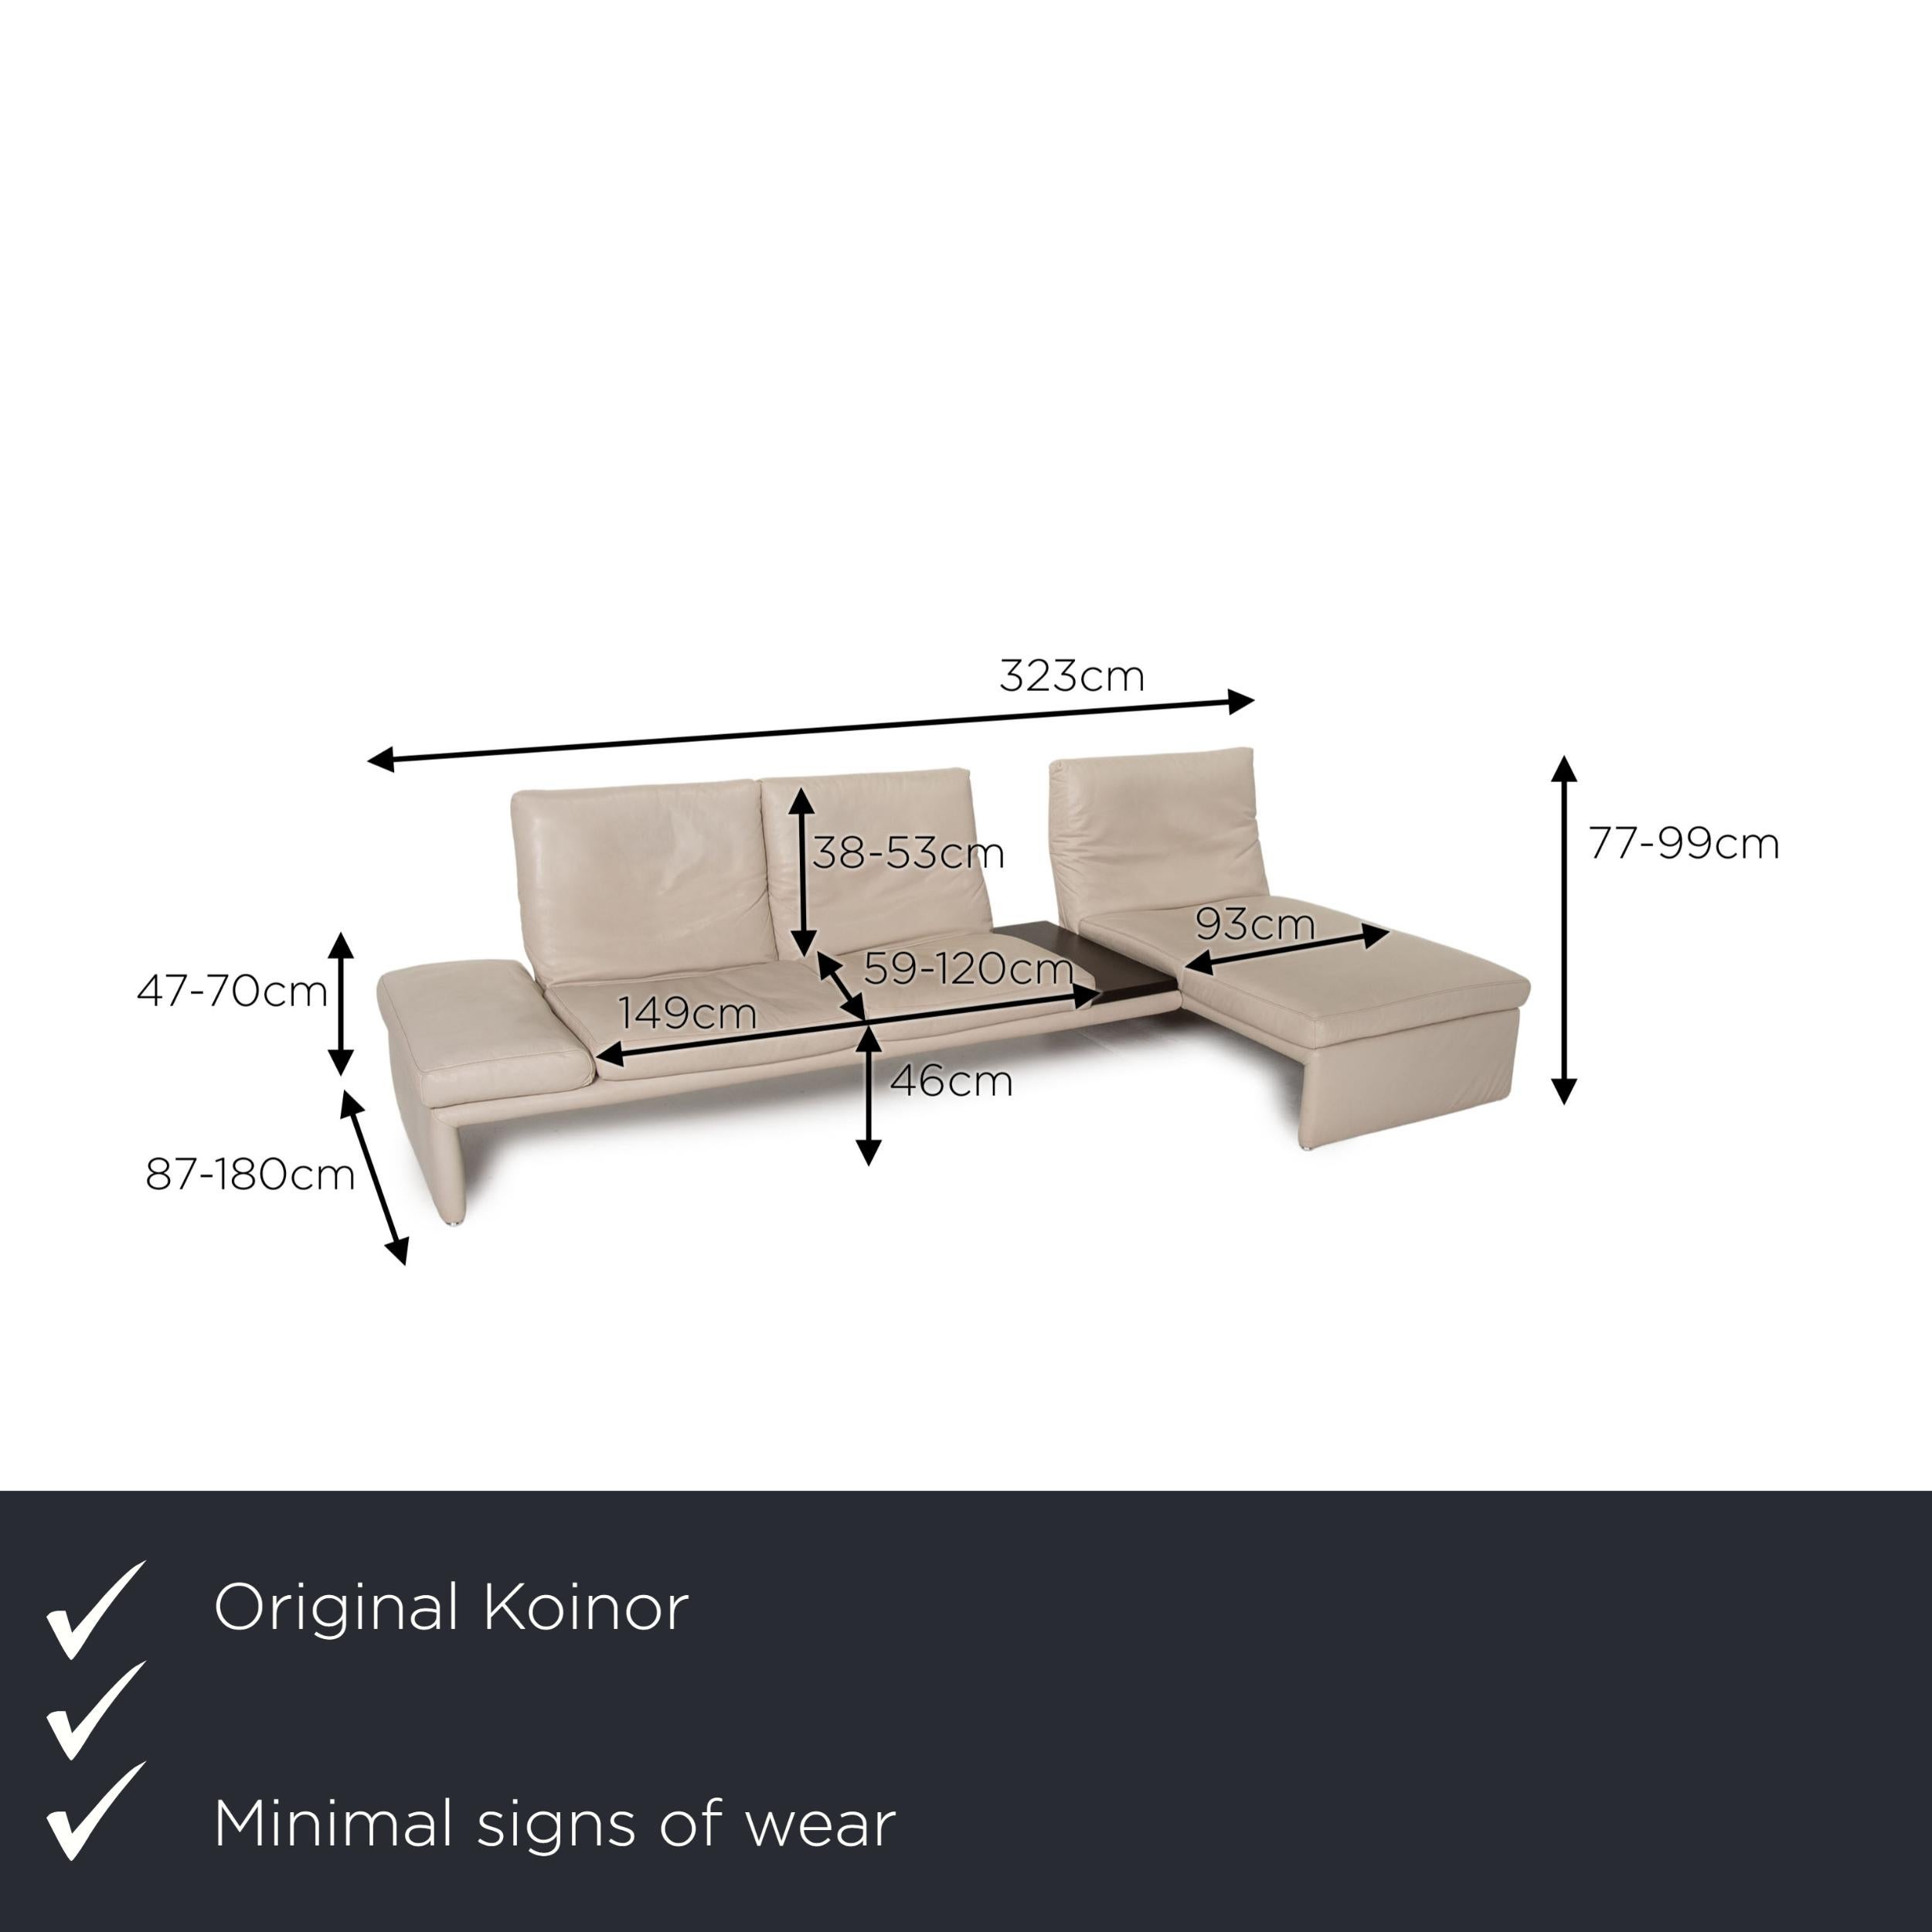 We present to you a Koinor Raoul leather sofa cream corner sofa function.
 

 Product measurements in centimeters:
 

Depth: 87
Width: 323
Height: 99
Seat height: 46
Rest height: 47
Seat depth: 59
Seat width: 149
Back height: 53.
 